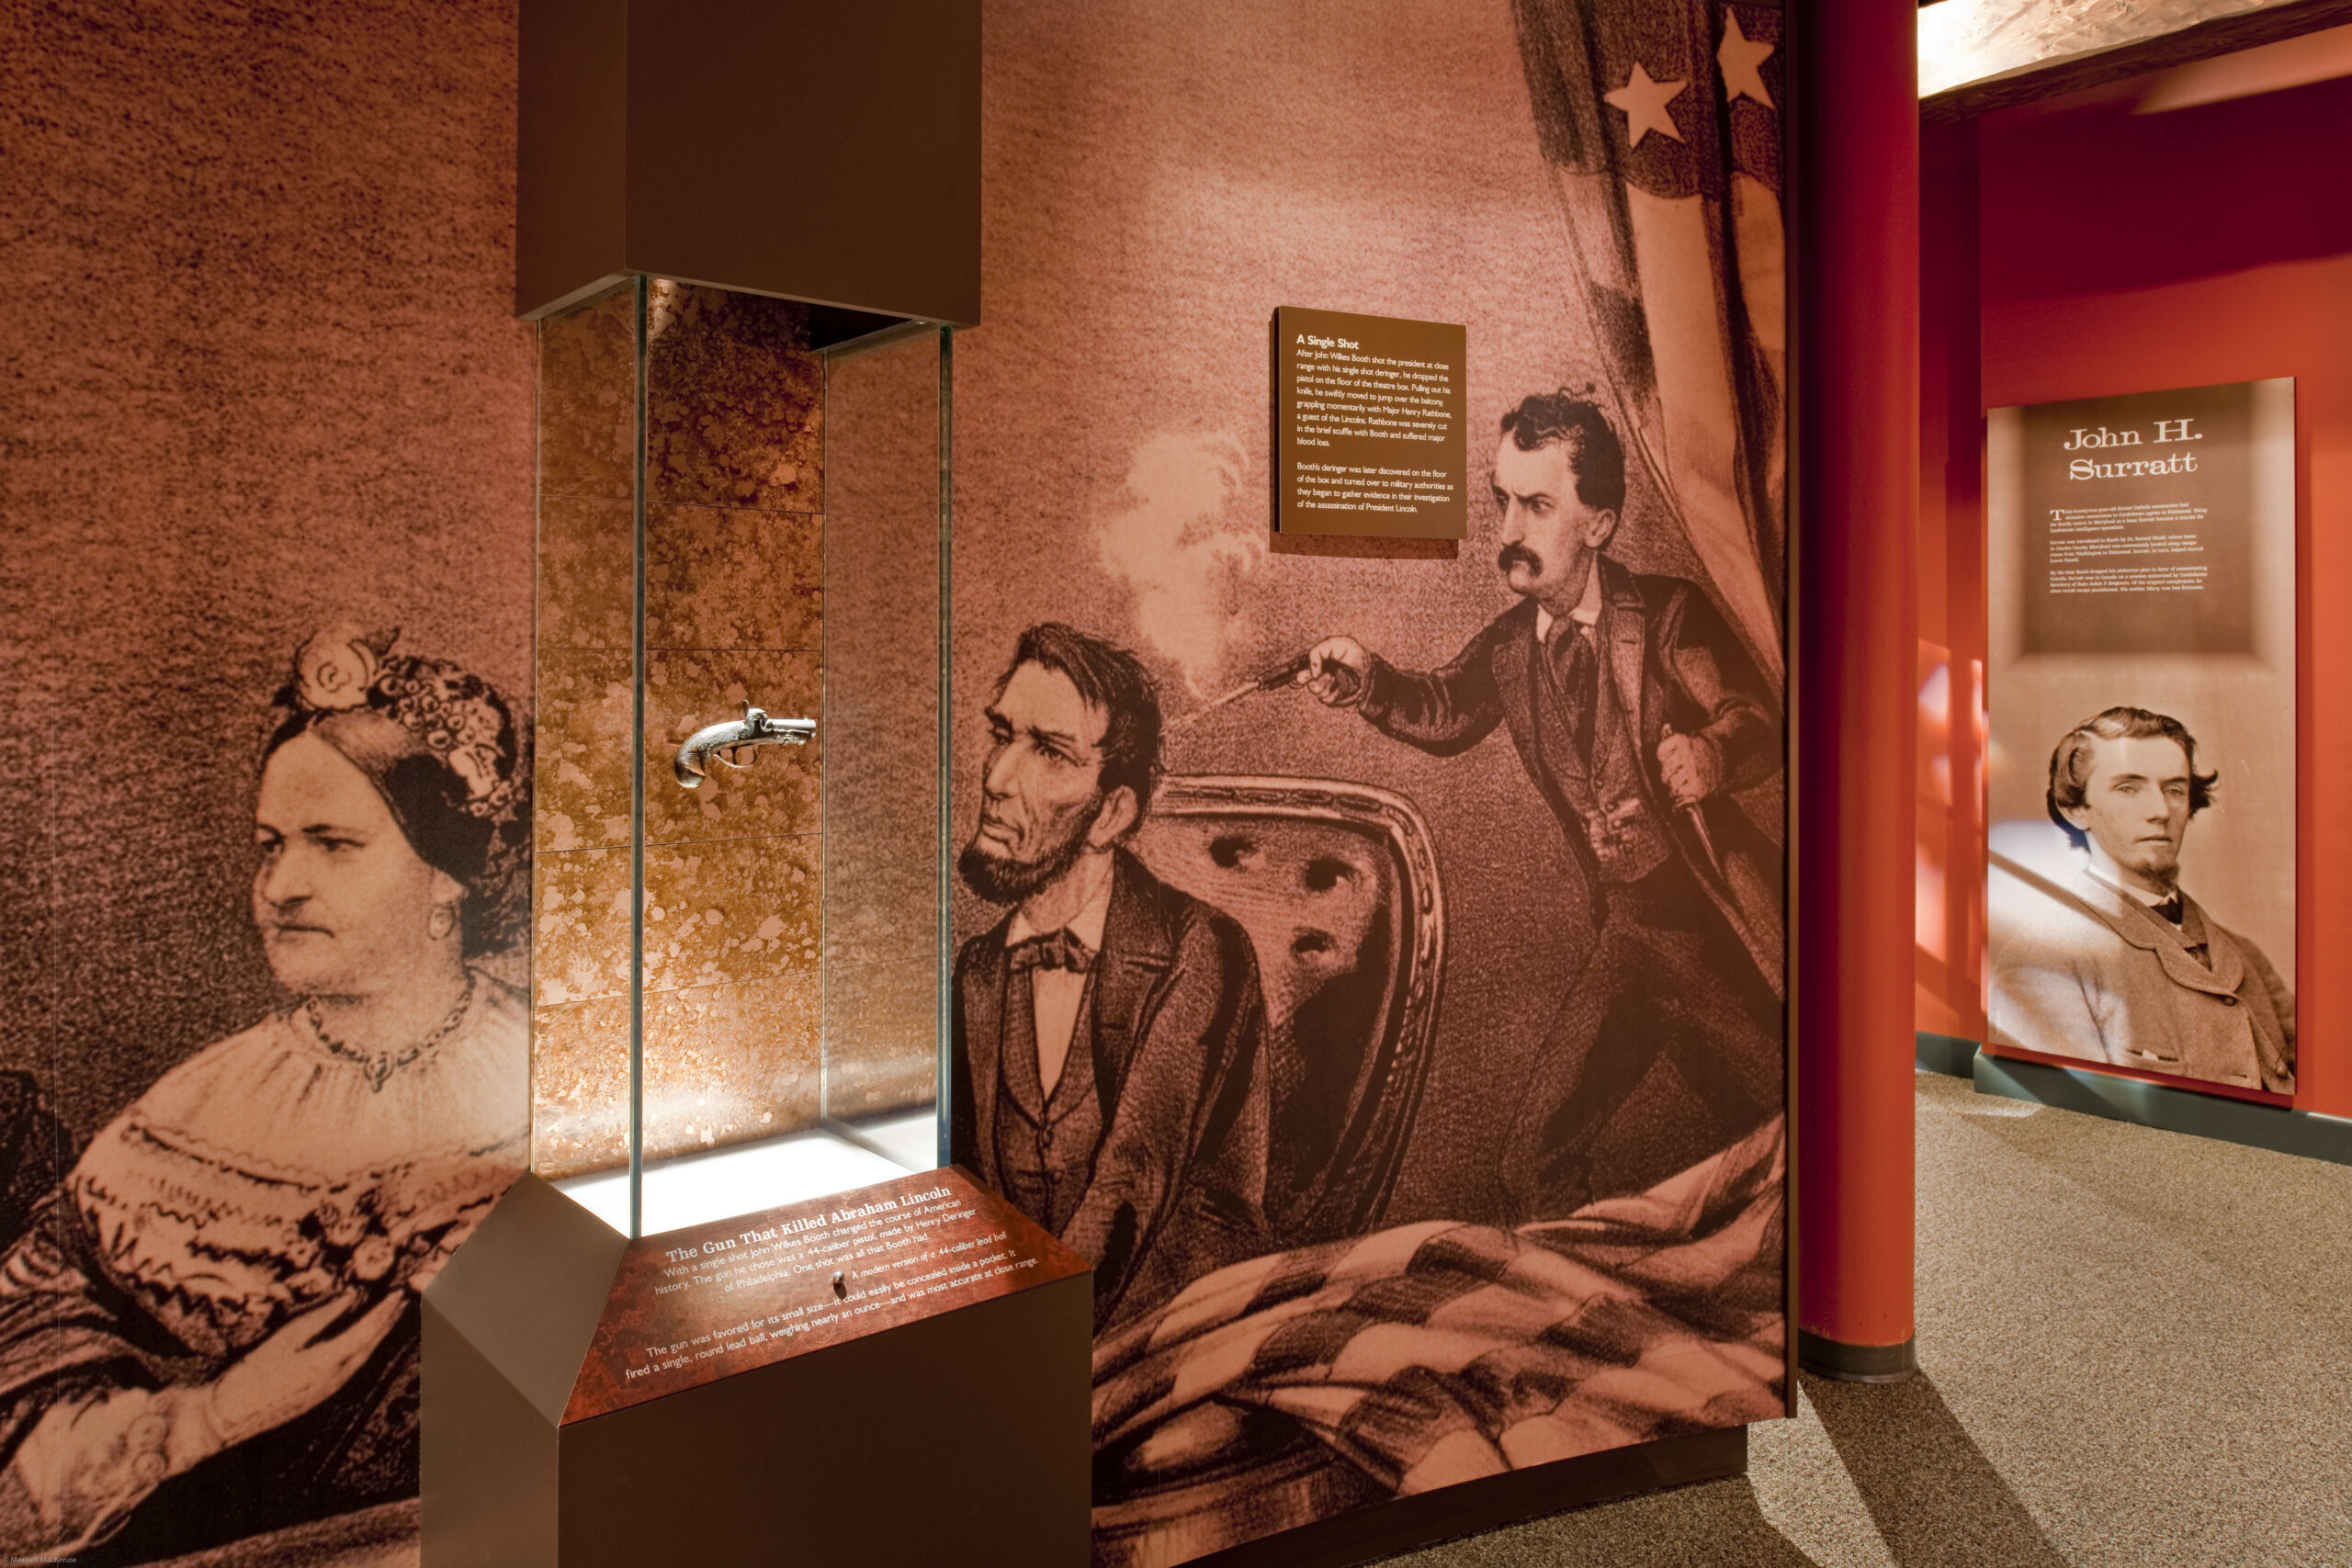 In the middle of a tall glass display case, a small silver gun appears to float in mid-air. Behind the case is a wall-sized drawing of John Wilkes Booth shooting Abraham Lincoln.